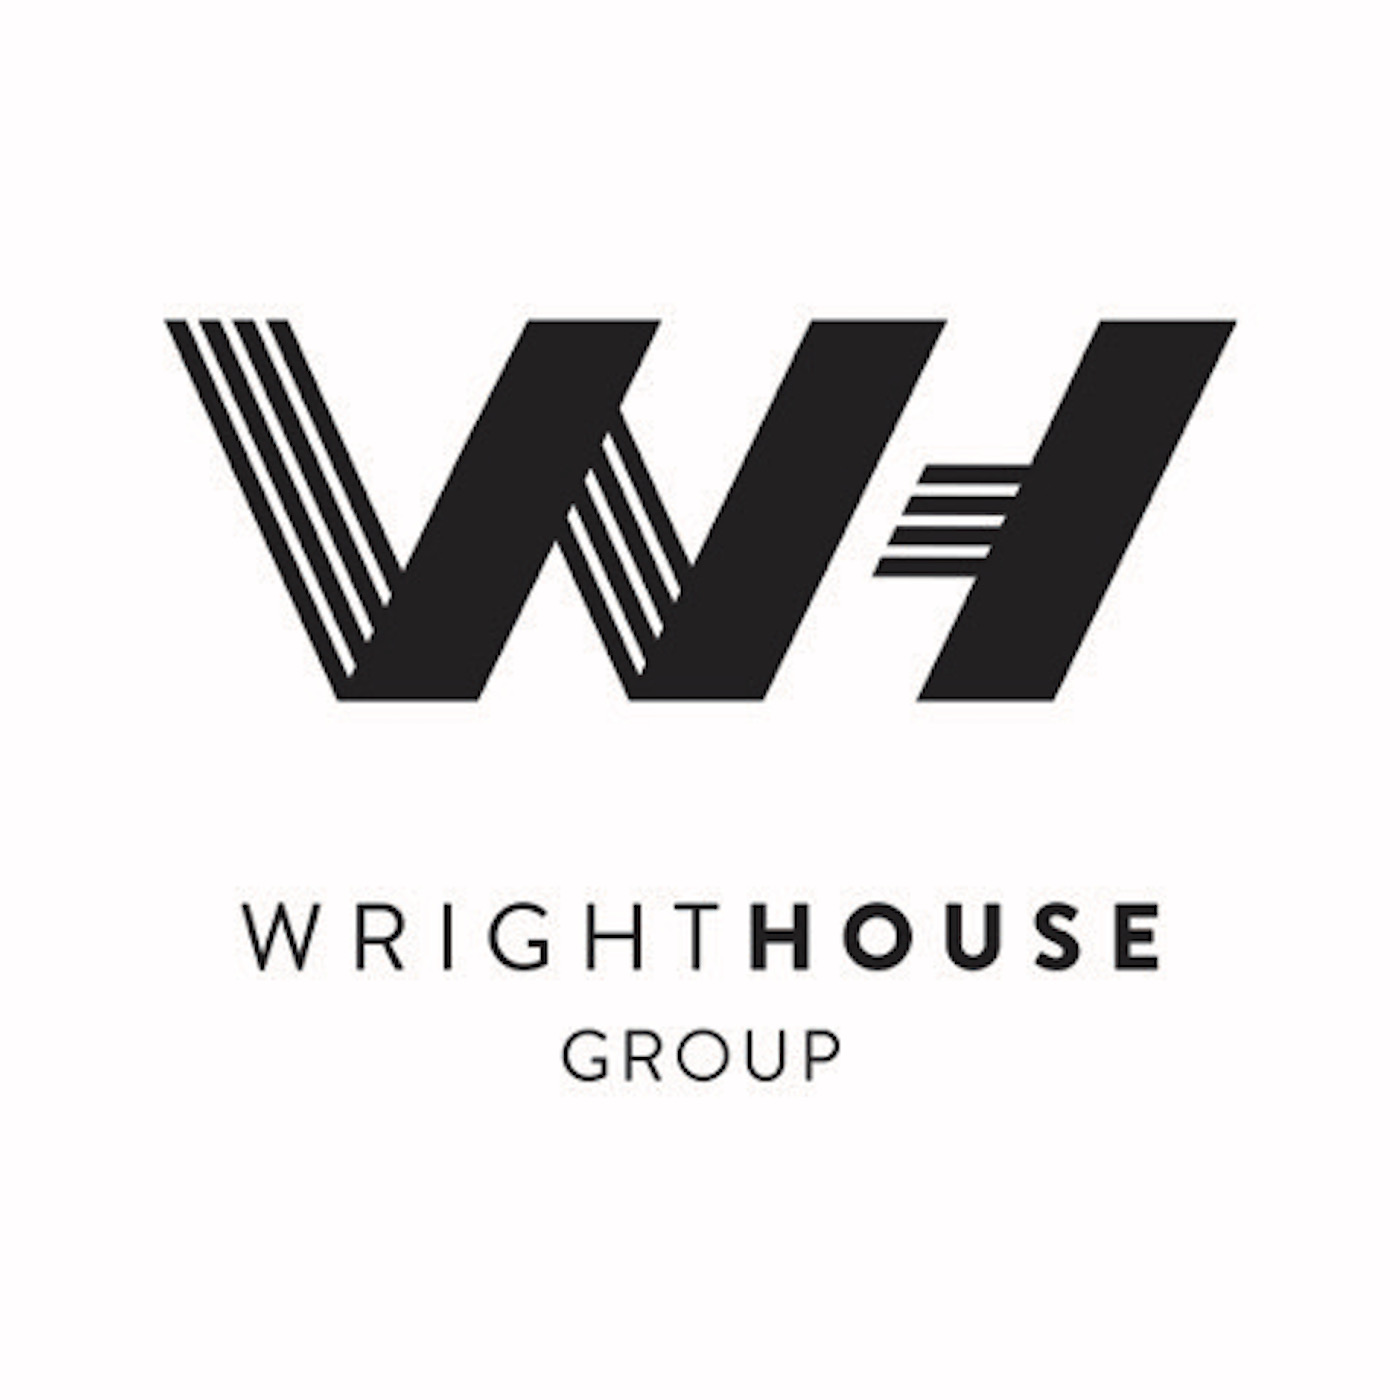 Artwork for WrightHouse Group